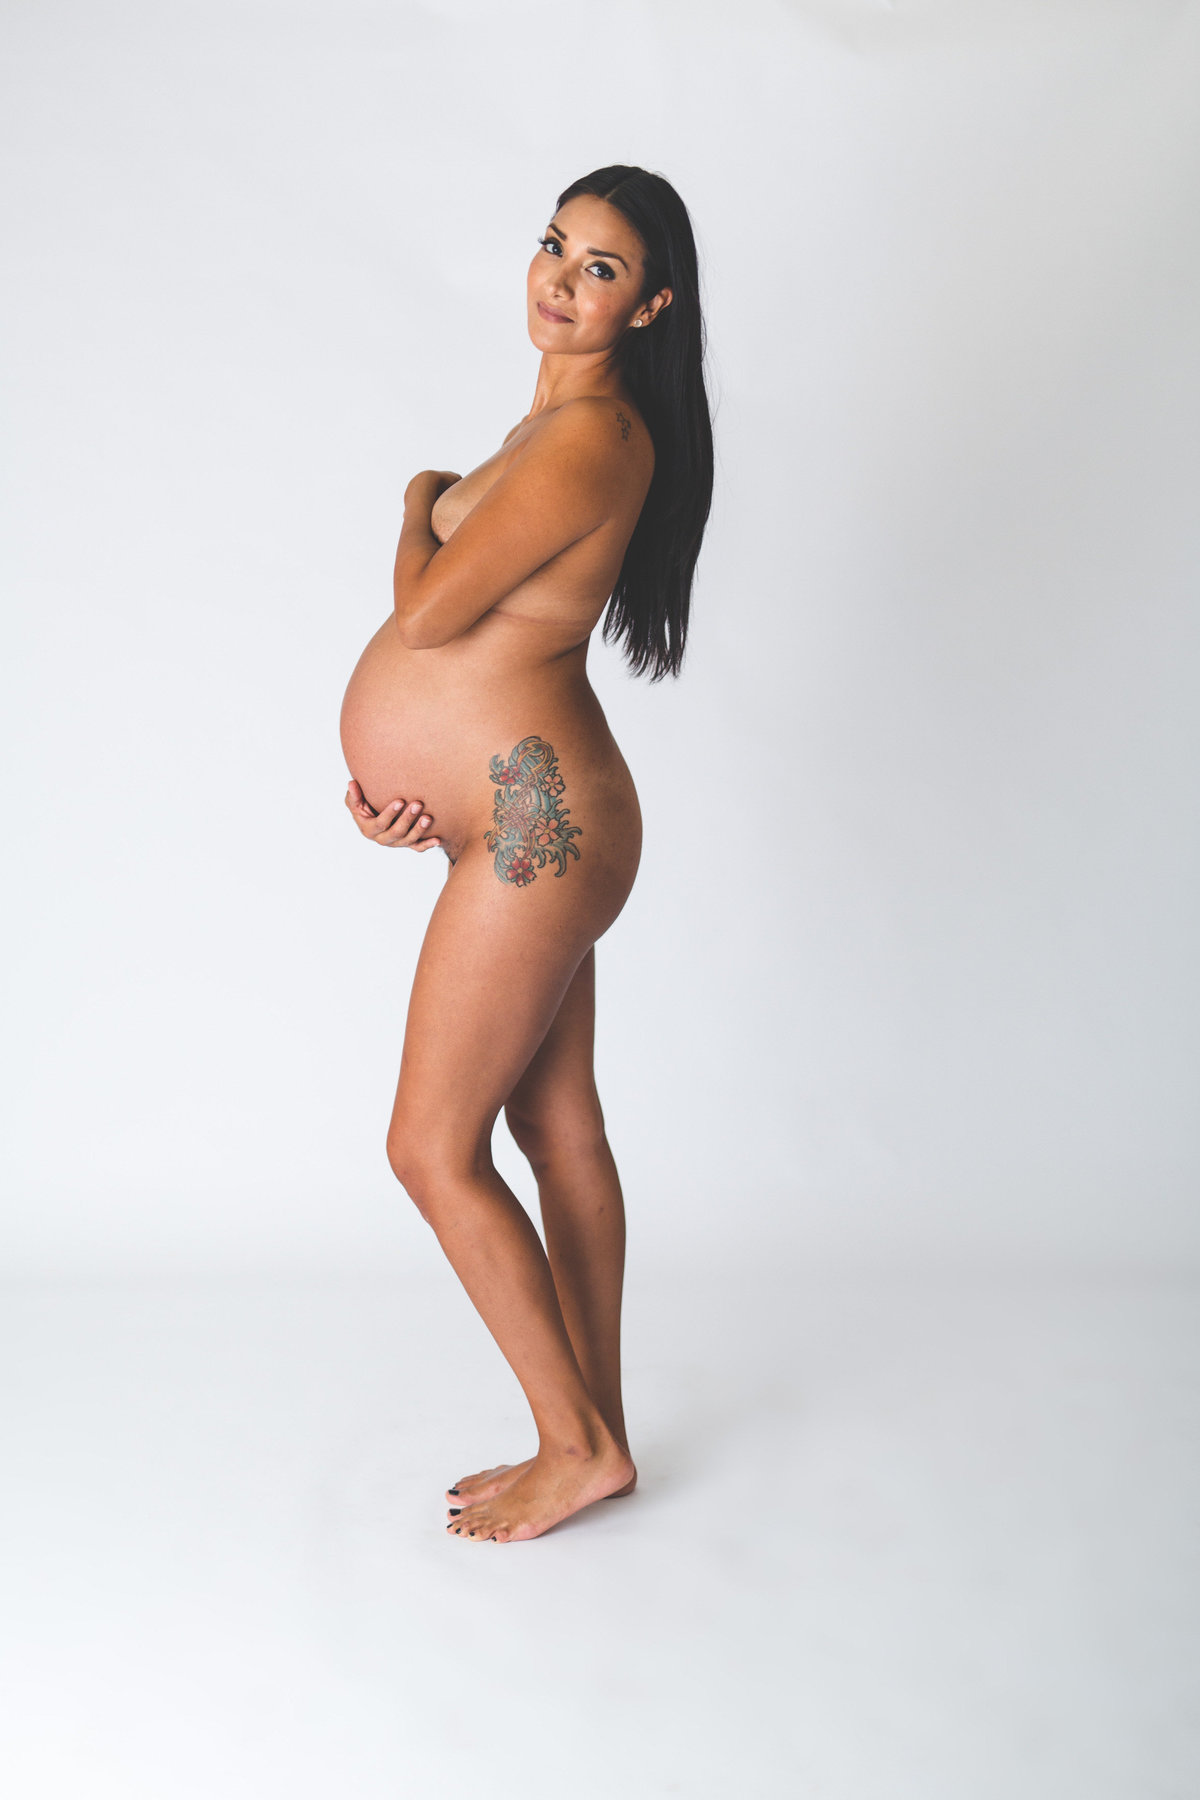 Maternity picture of woman covering herself with her hands and posing in front of white backdrop.